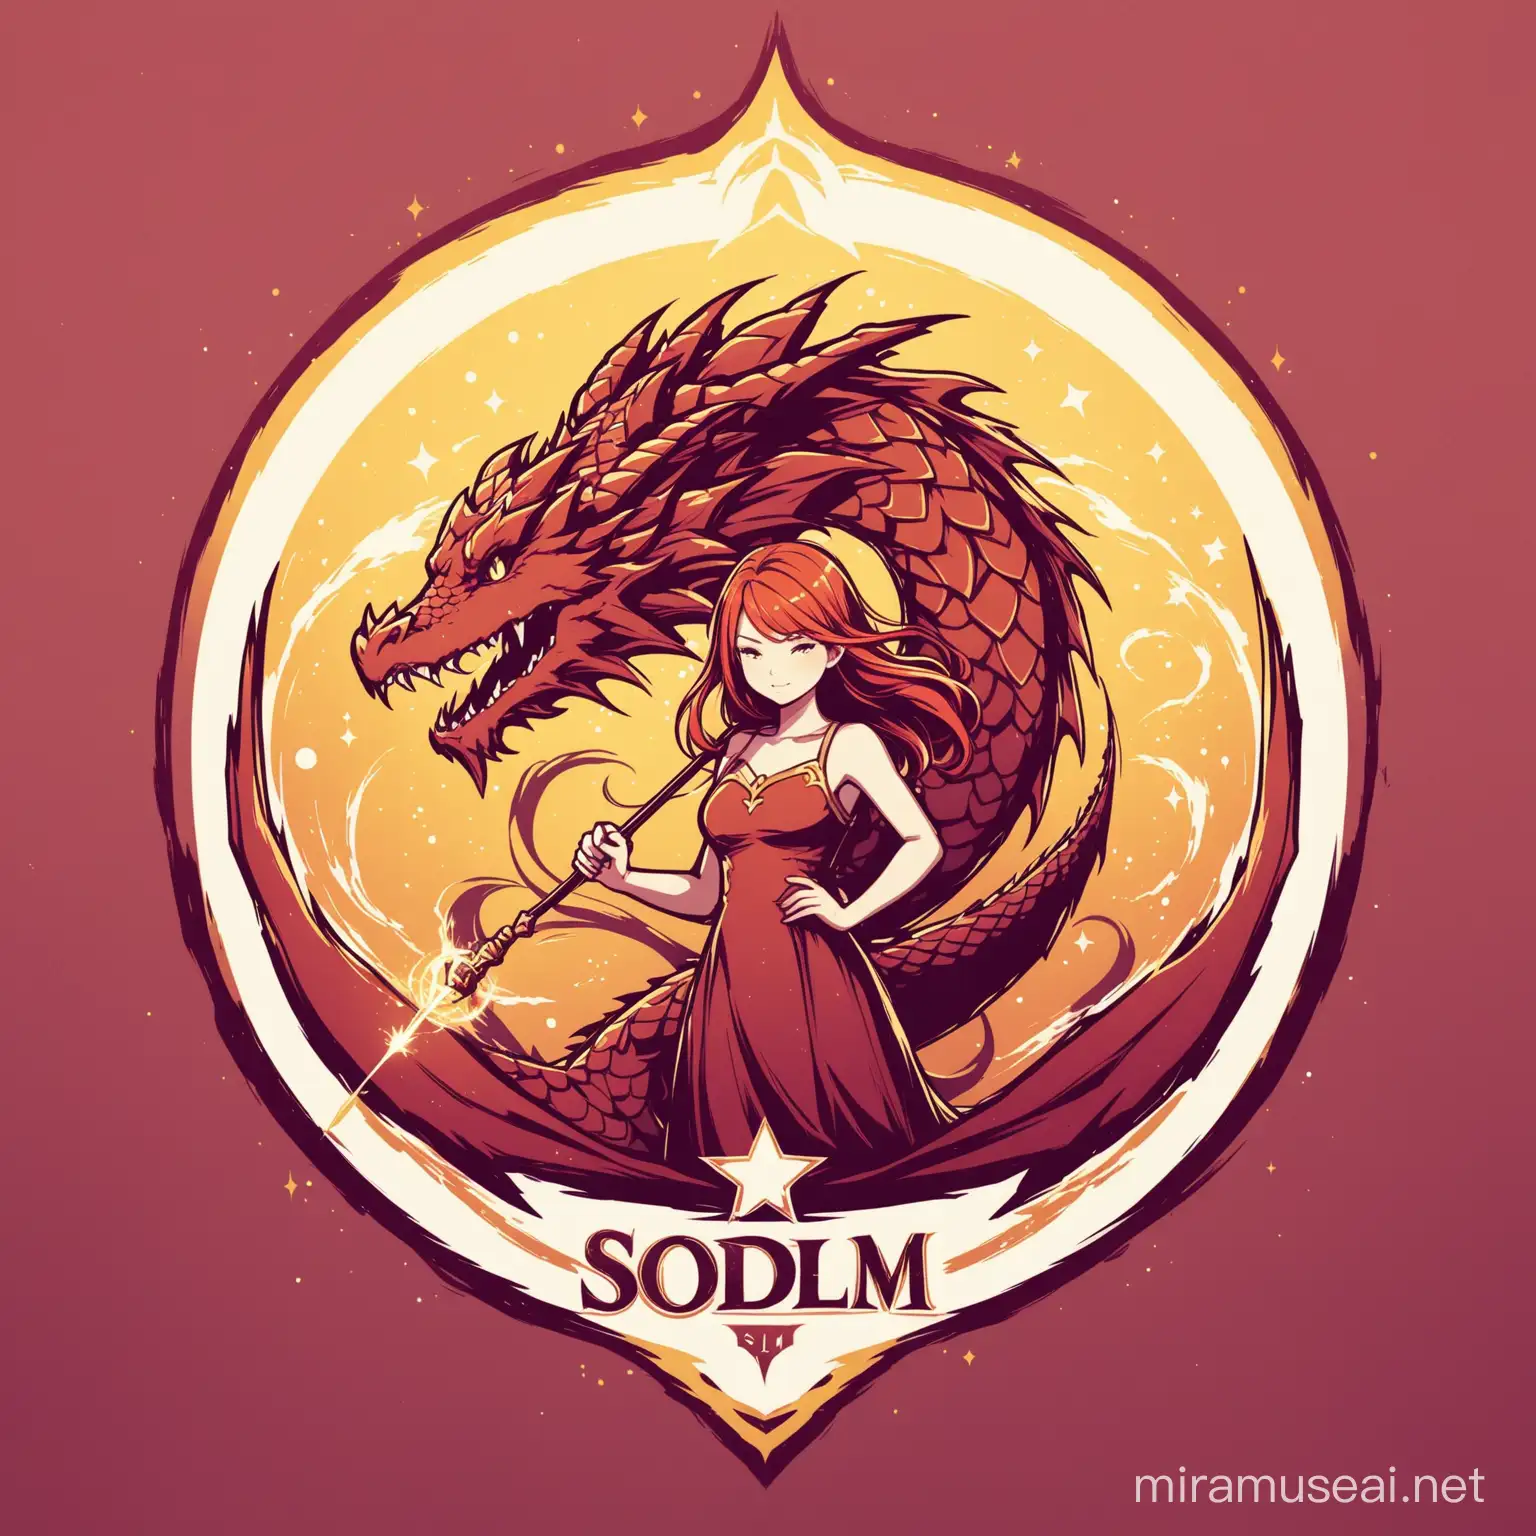 I want a logo called SODLM with the theme of a girl holding a wand. Behind there will be a dragon.